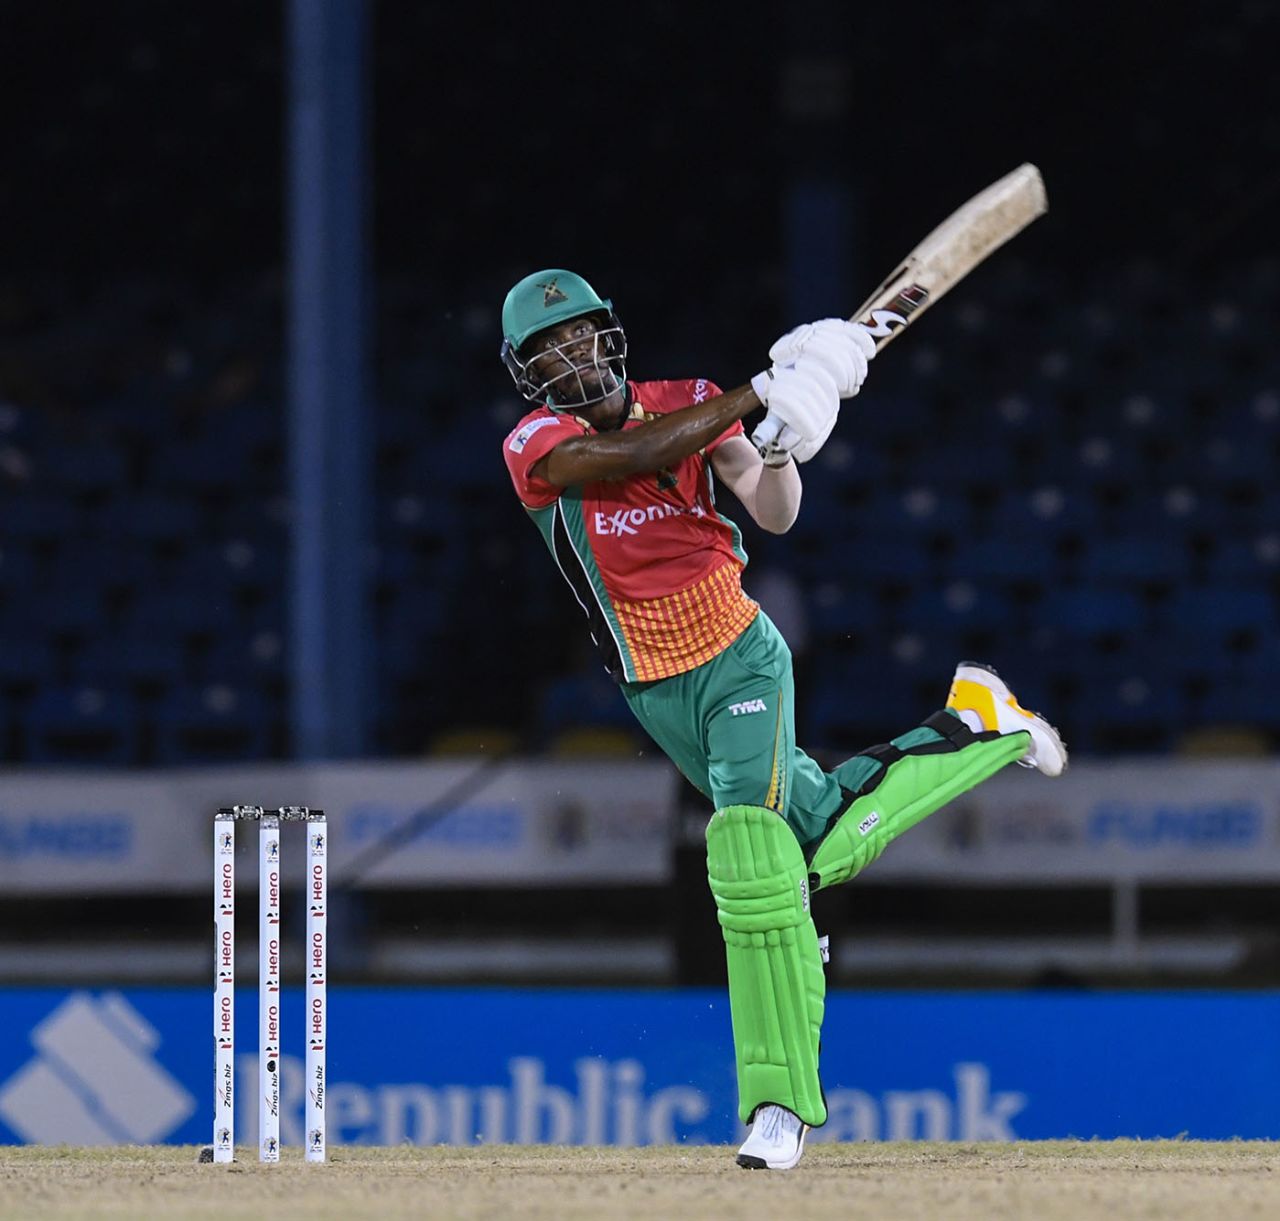 Keemo Paul launches one into the night sky, Trinbago Knight Riders v Guyana Amazon Warriors, Port-of-Spain, CPL, August 27, 2020